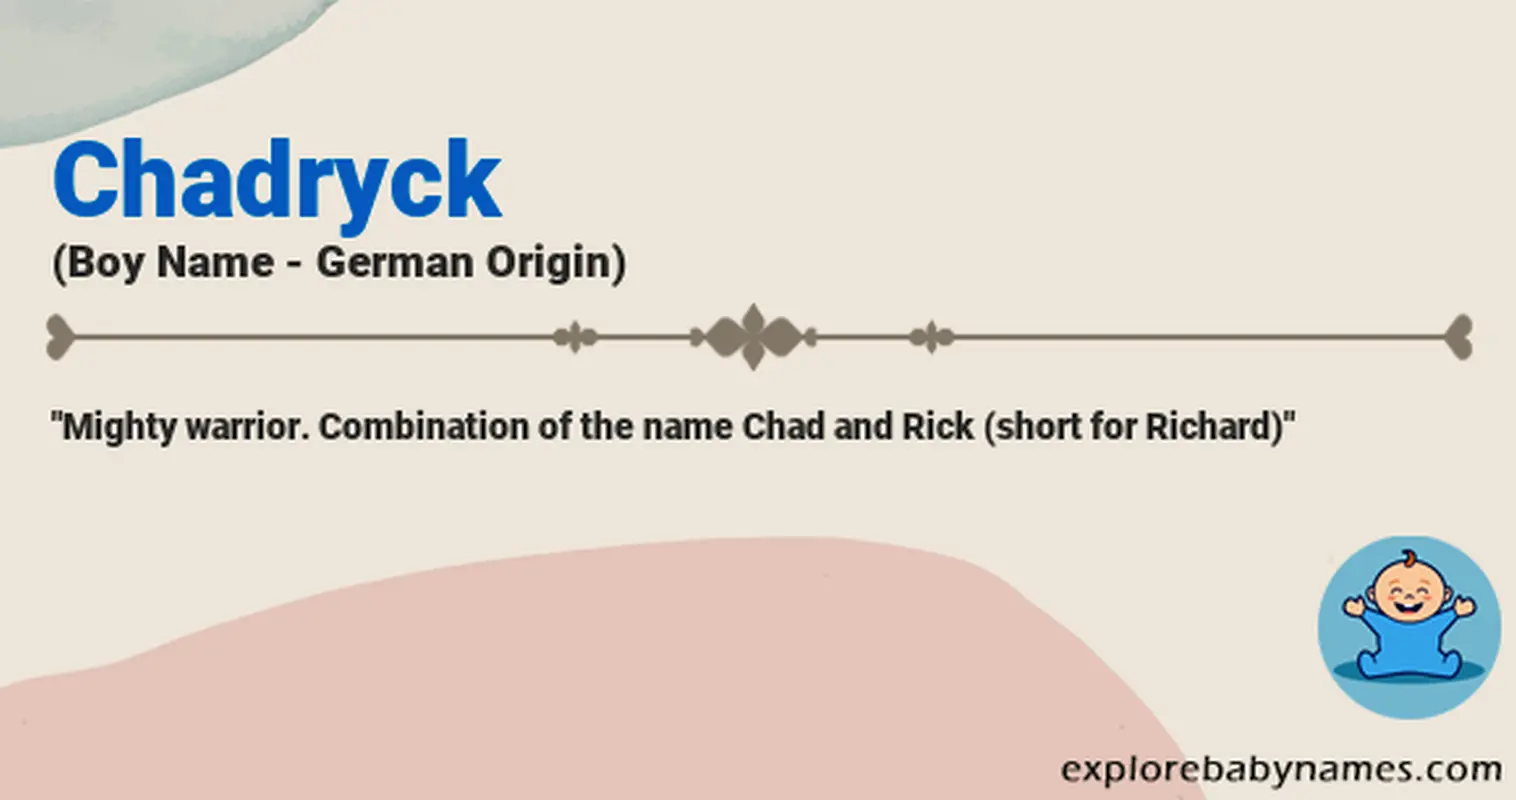 Meaning of Chadryck